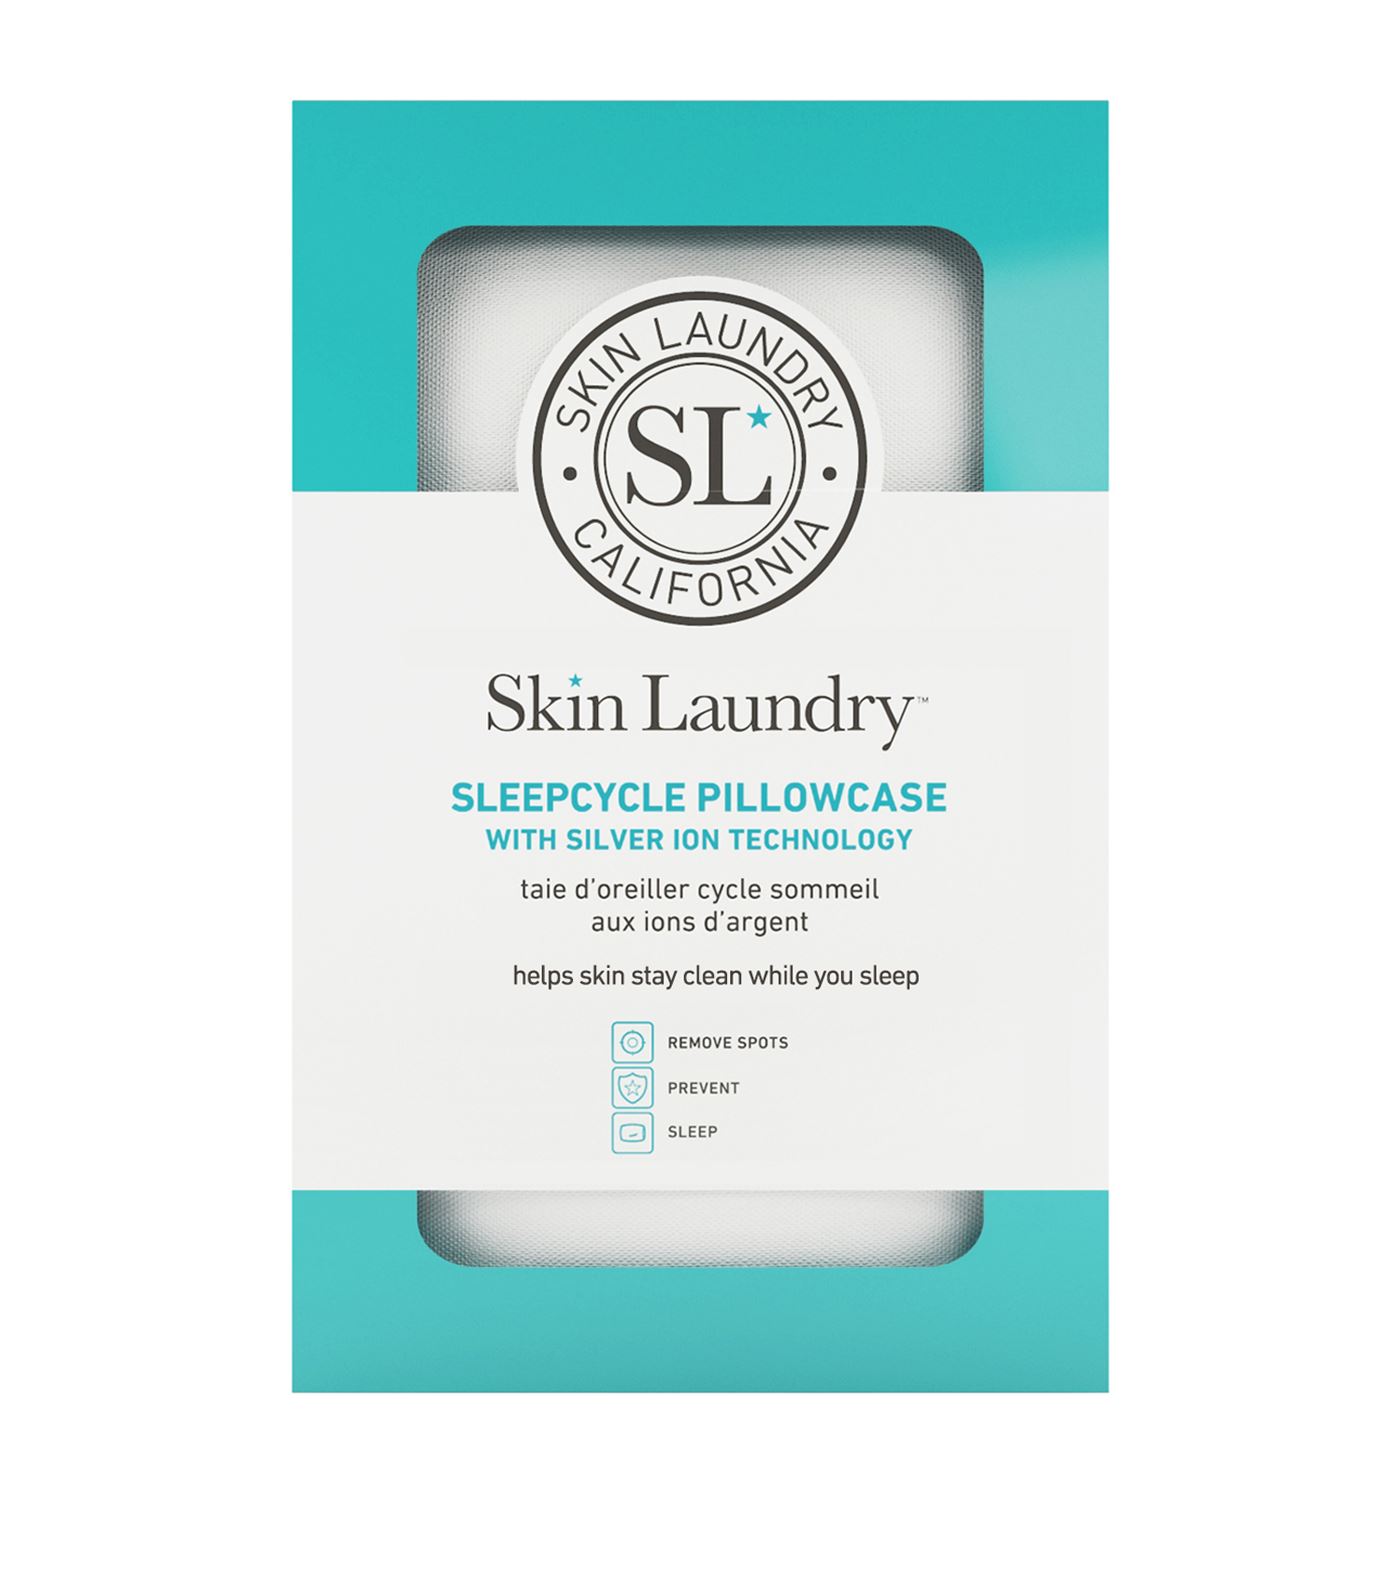 Skin Laundry - Treated with charged silver ion technology, the SleepCycle Pillowcase helps prevent b